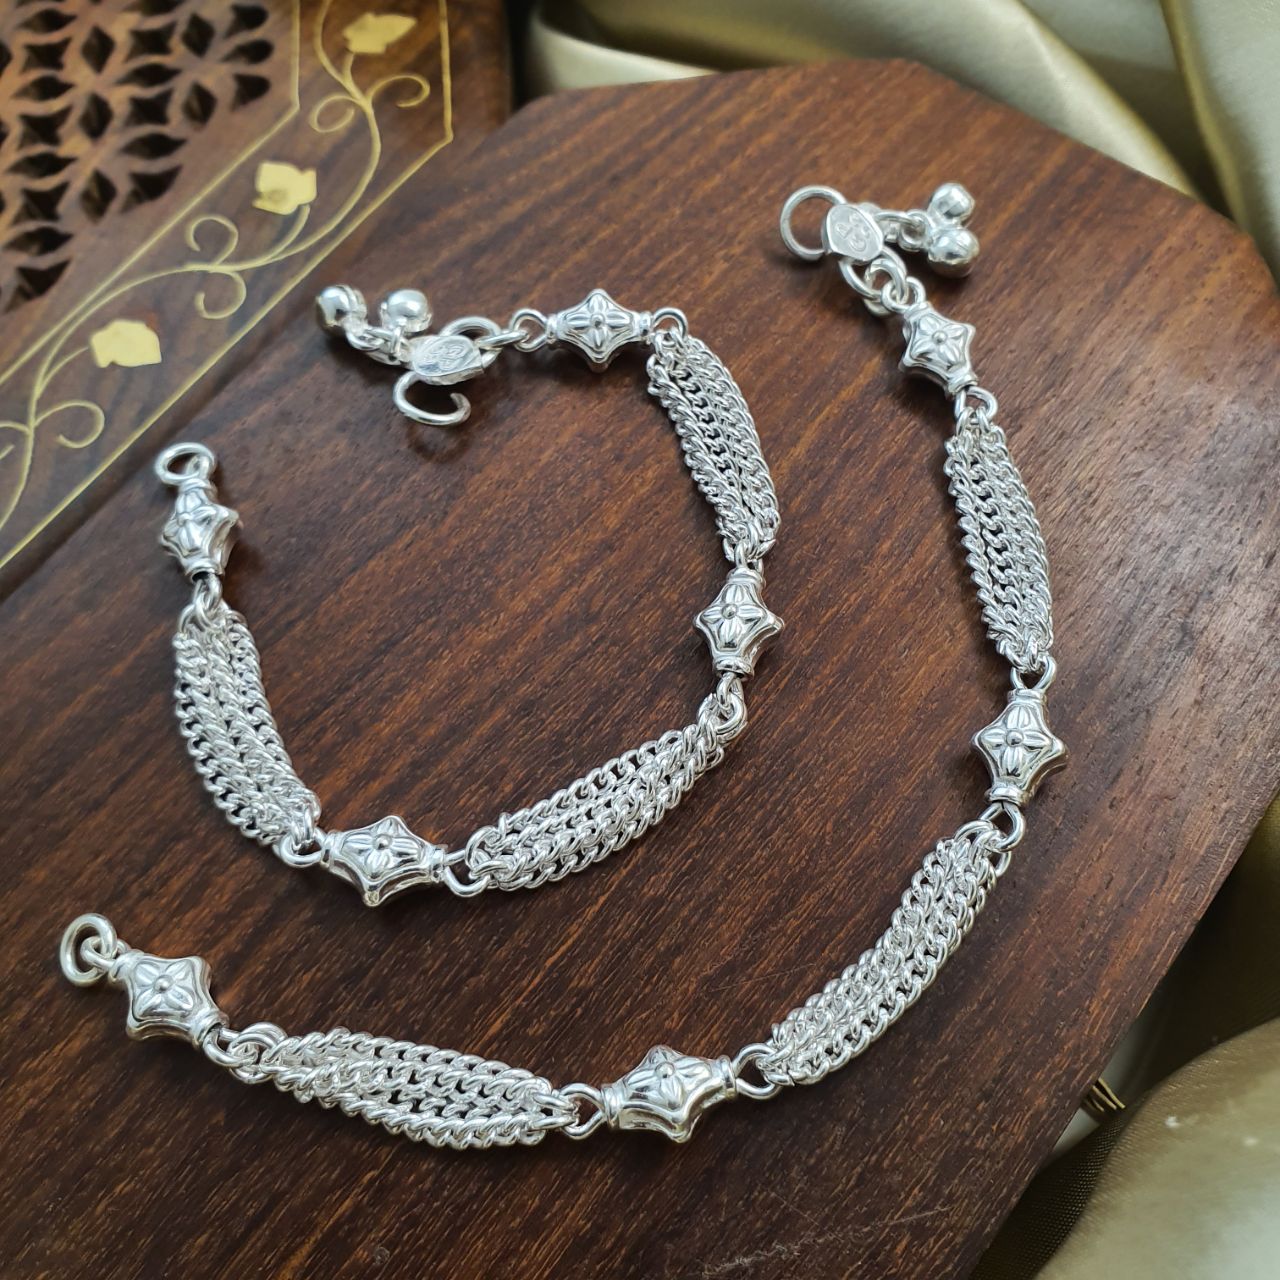 Multilayered Chain Anklets 6.0 Inches